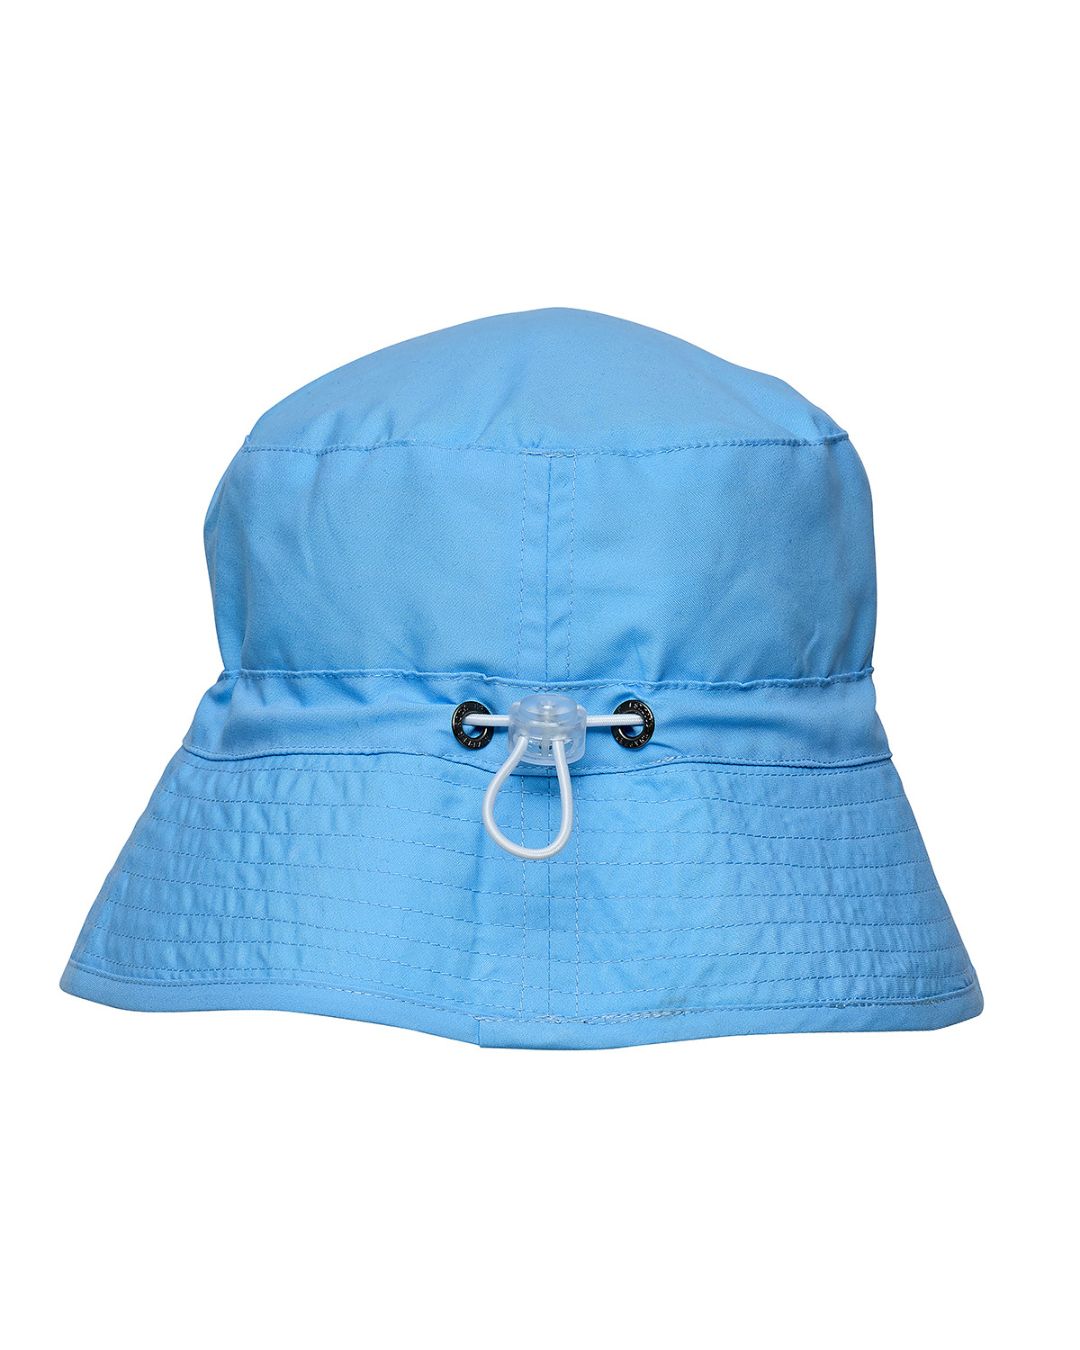 Bucket hat Light Blue with UPF 50+ sun protection back